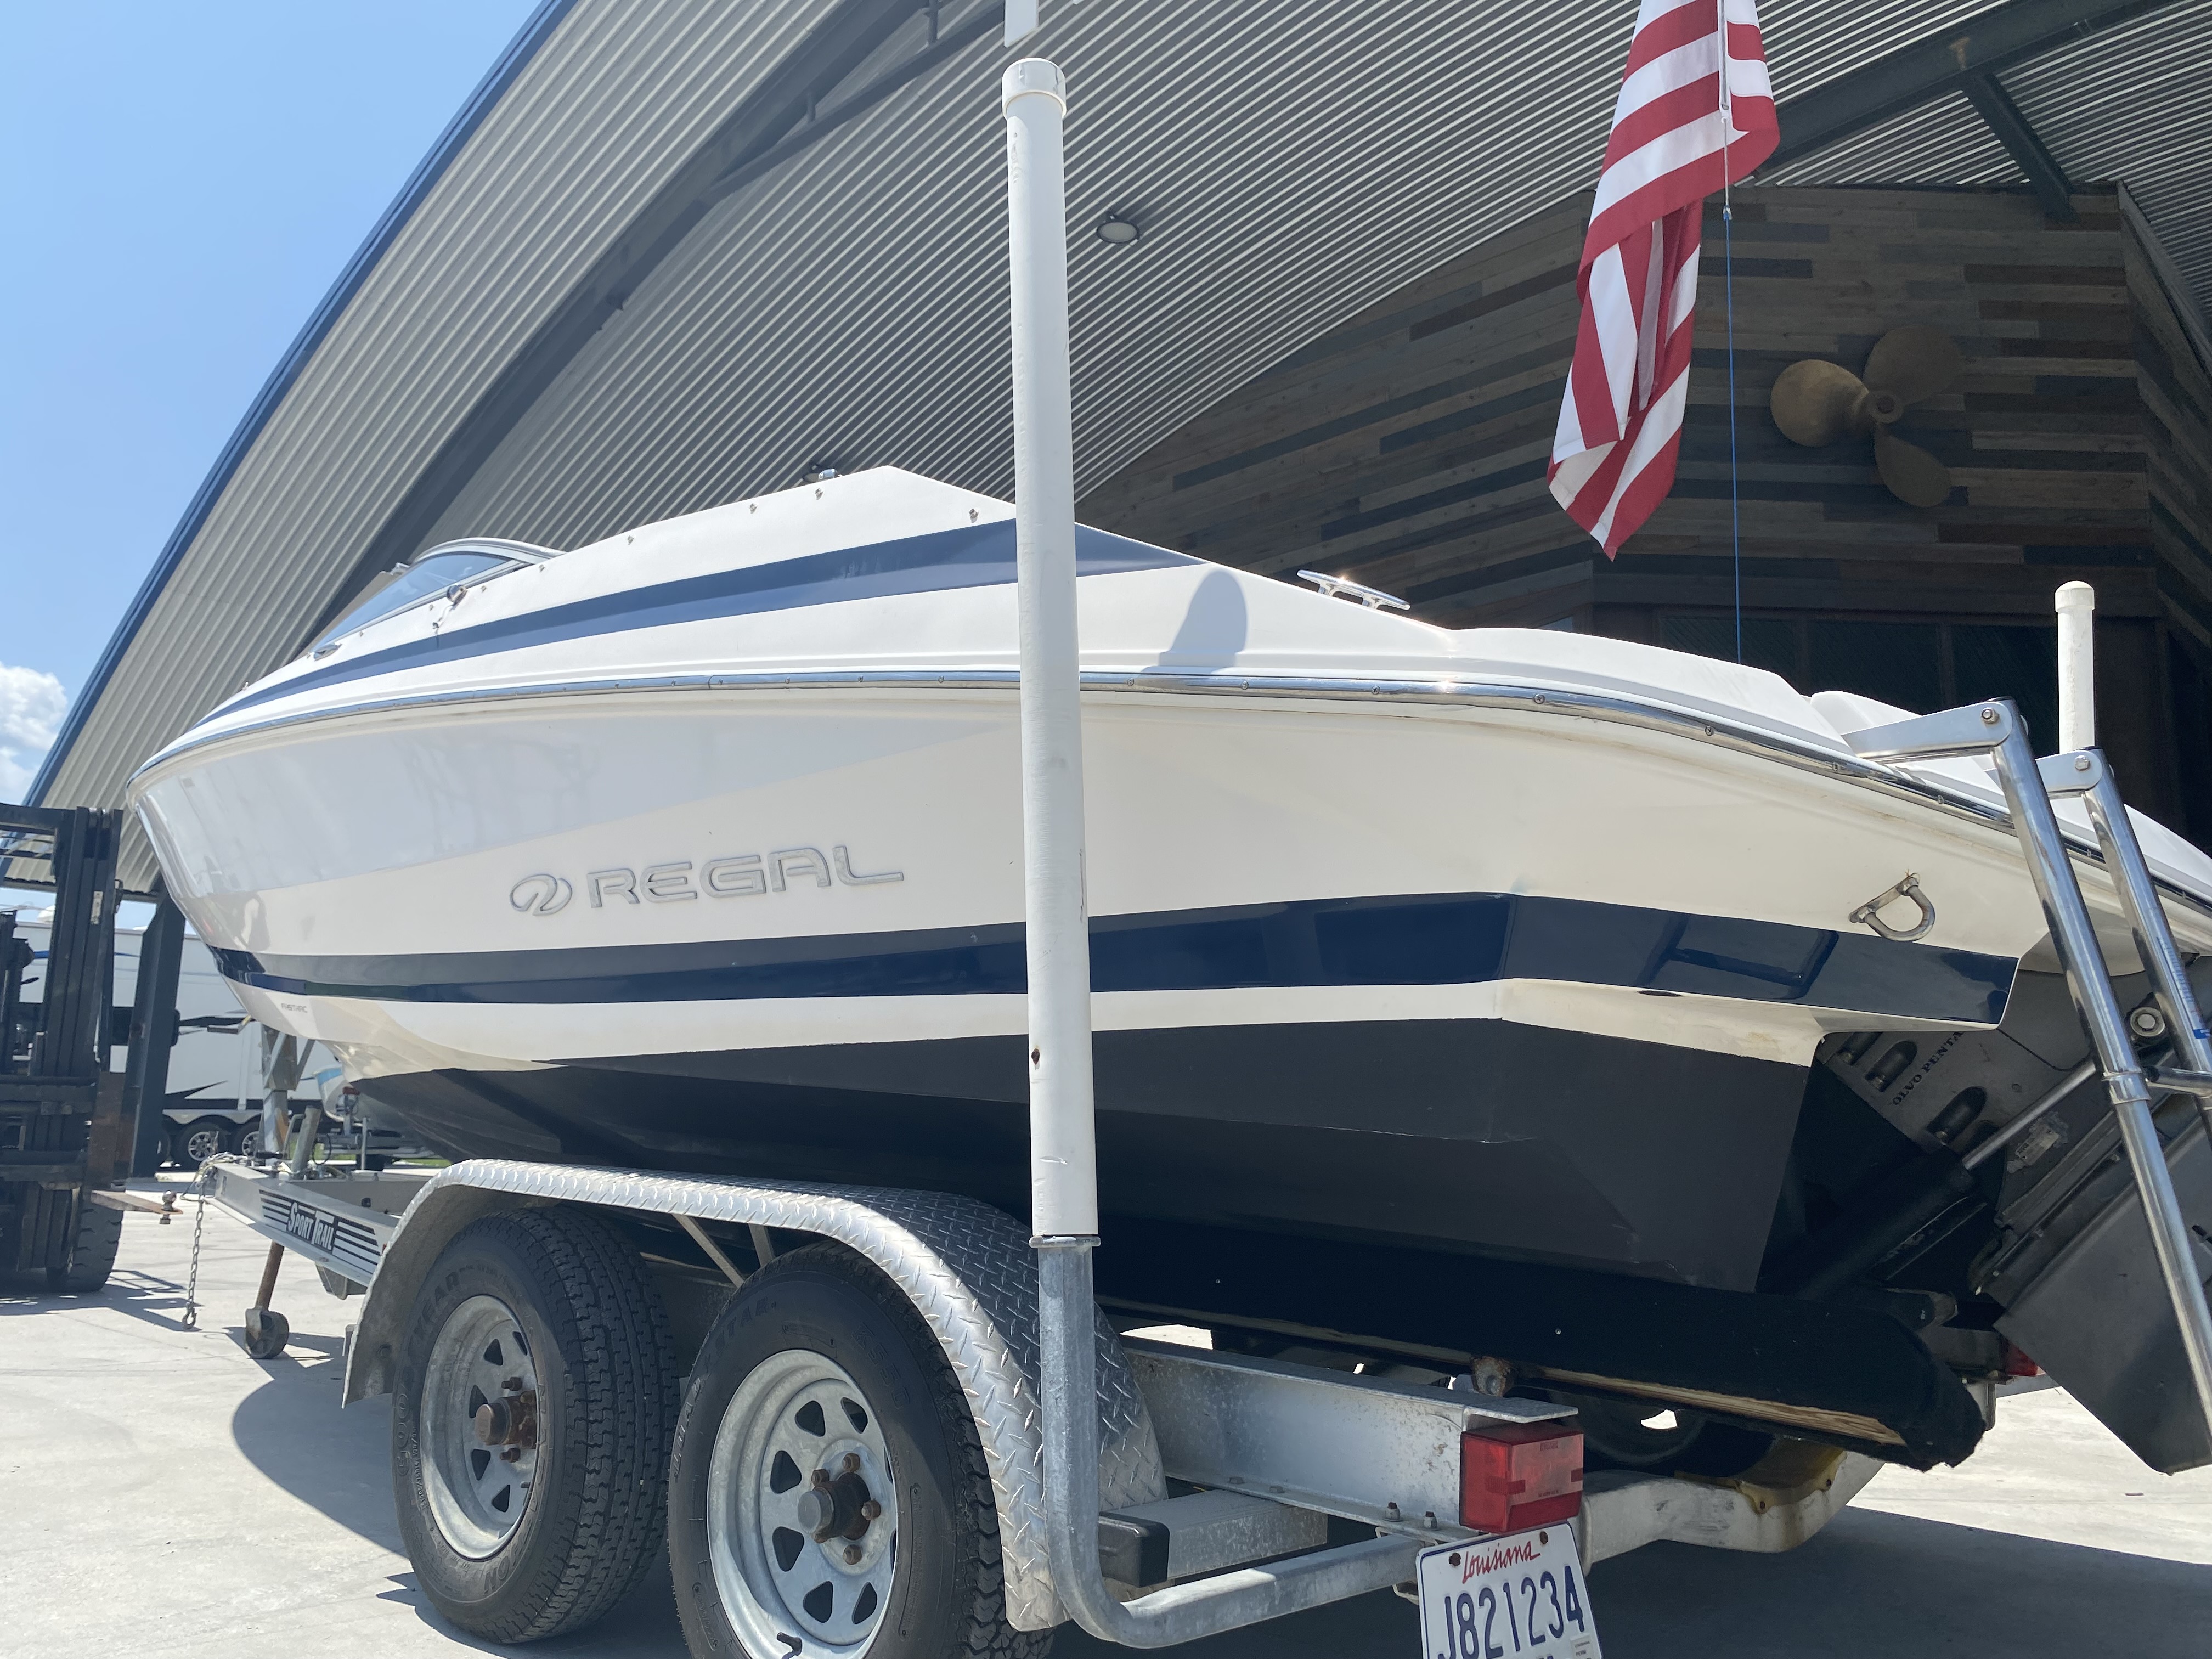 2007 Regal boat for sale, model of the boat is Sport Boat 2000 Bowrider & Image # 11 of 11